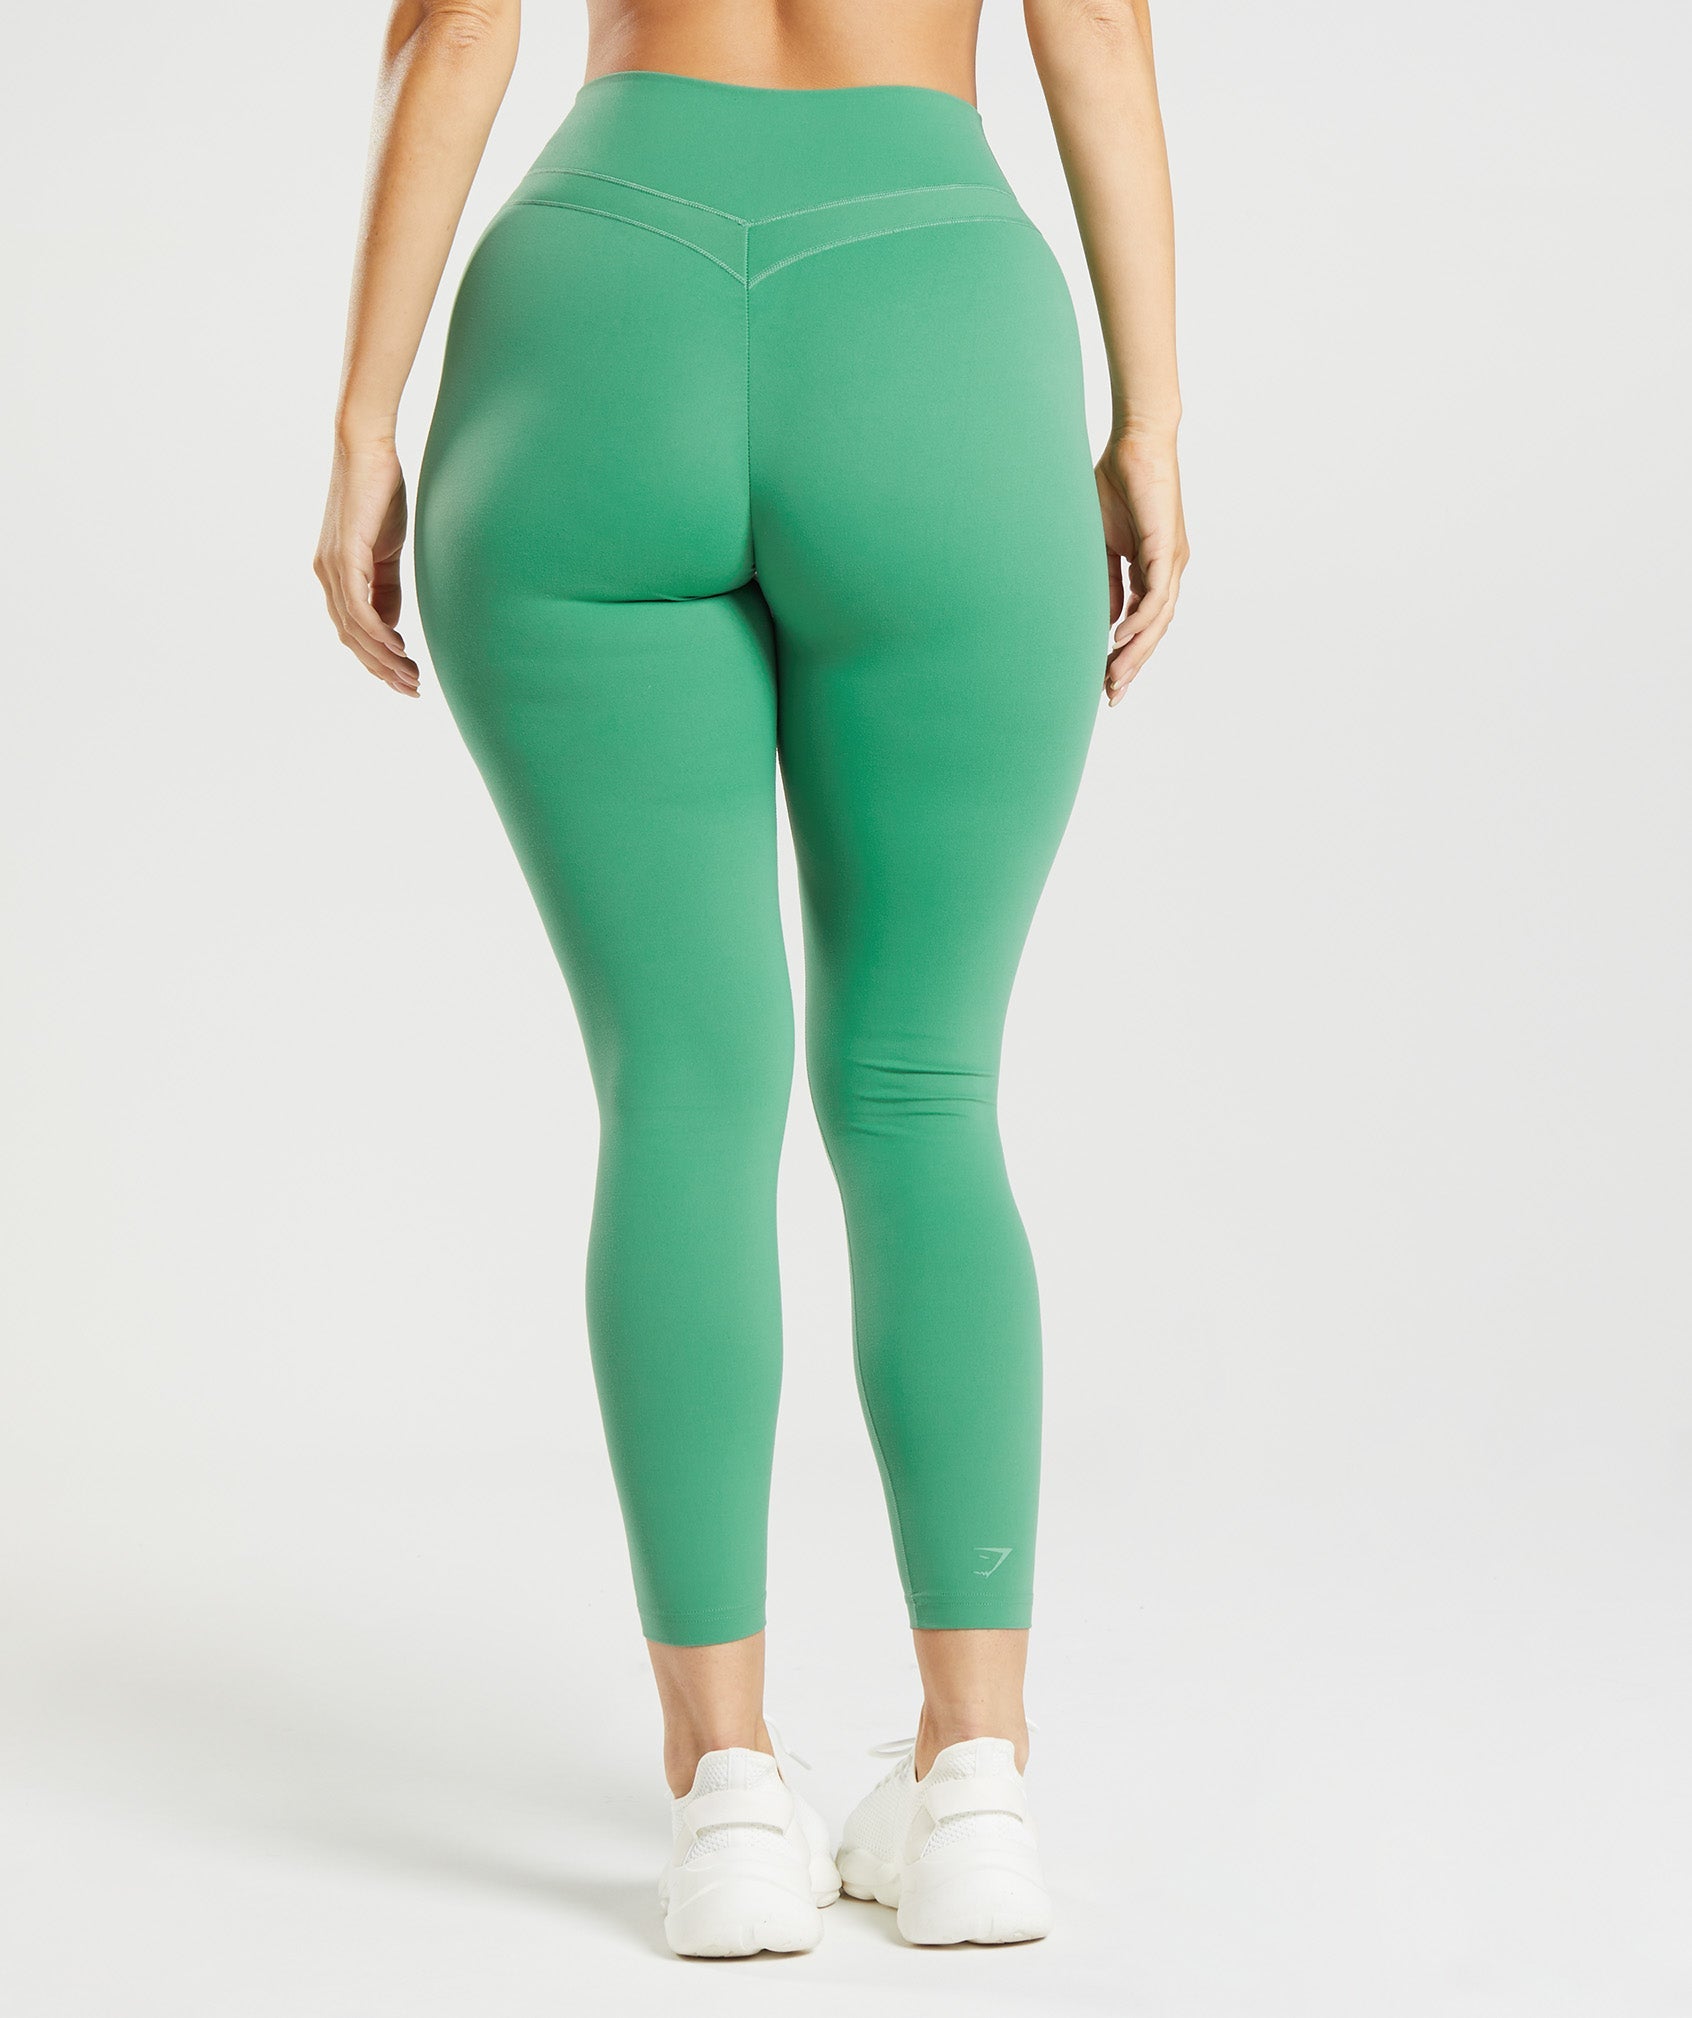 Whitney High Rise Leggings in Palm Green - view 2